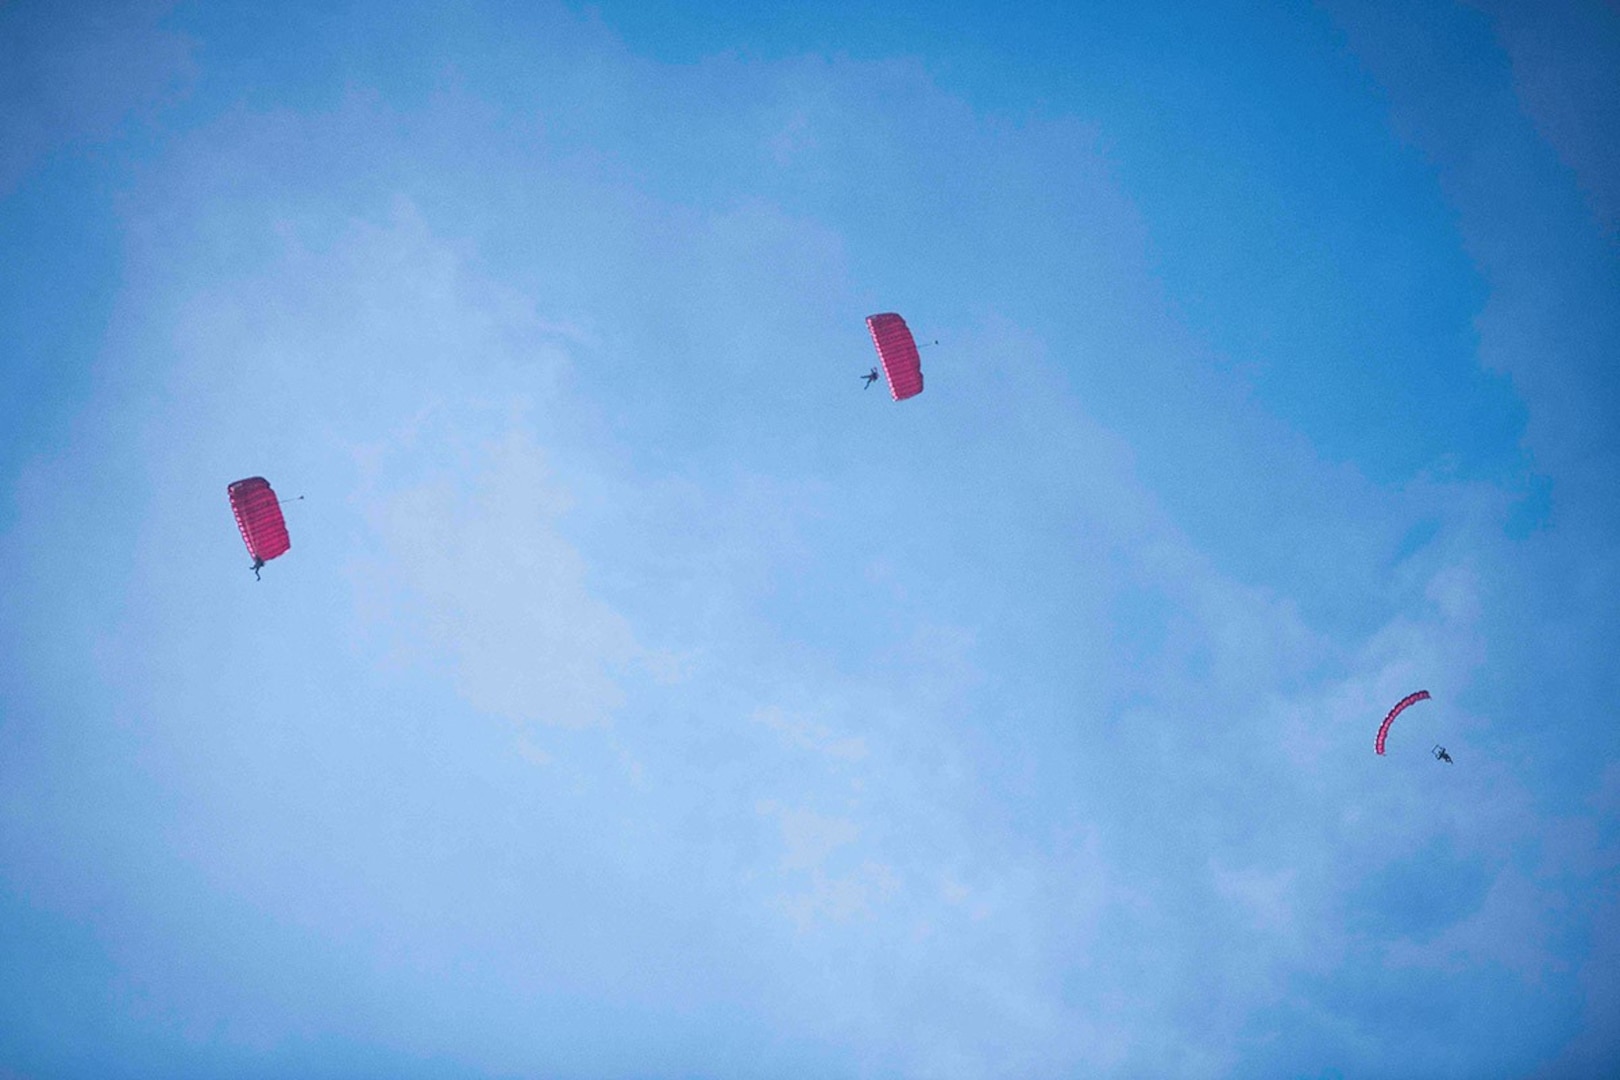 Members of the Special Warfare Training Wing parachute over Airmen’s Heritage Park during a Medal of Honor plaque unveiling ceremony to honor Master Sgt. John Chapman at Joint Base San Antonio-Randolph March 4, 2021.